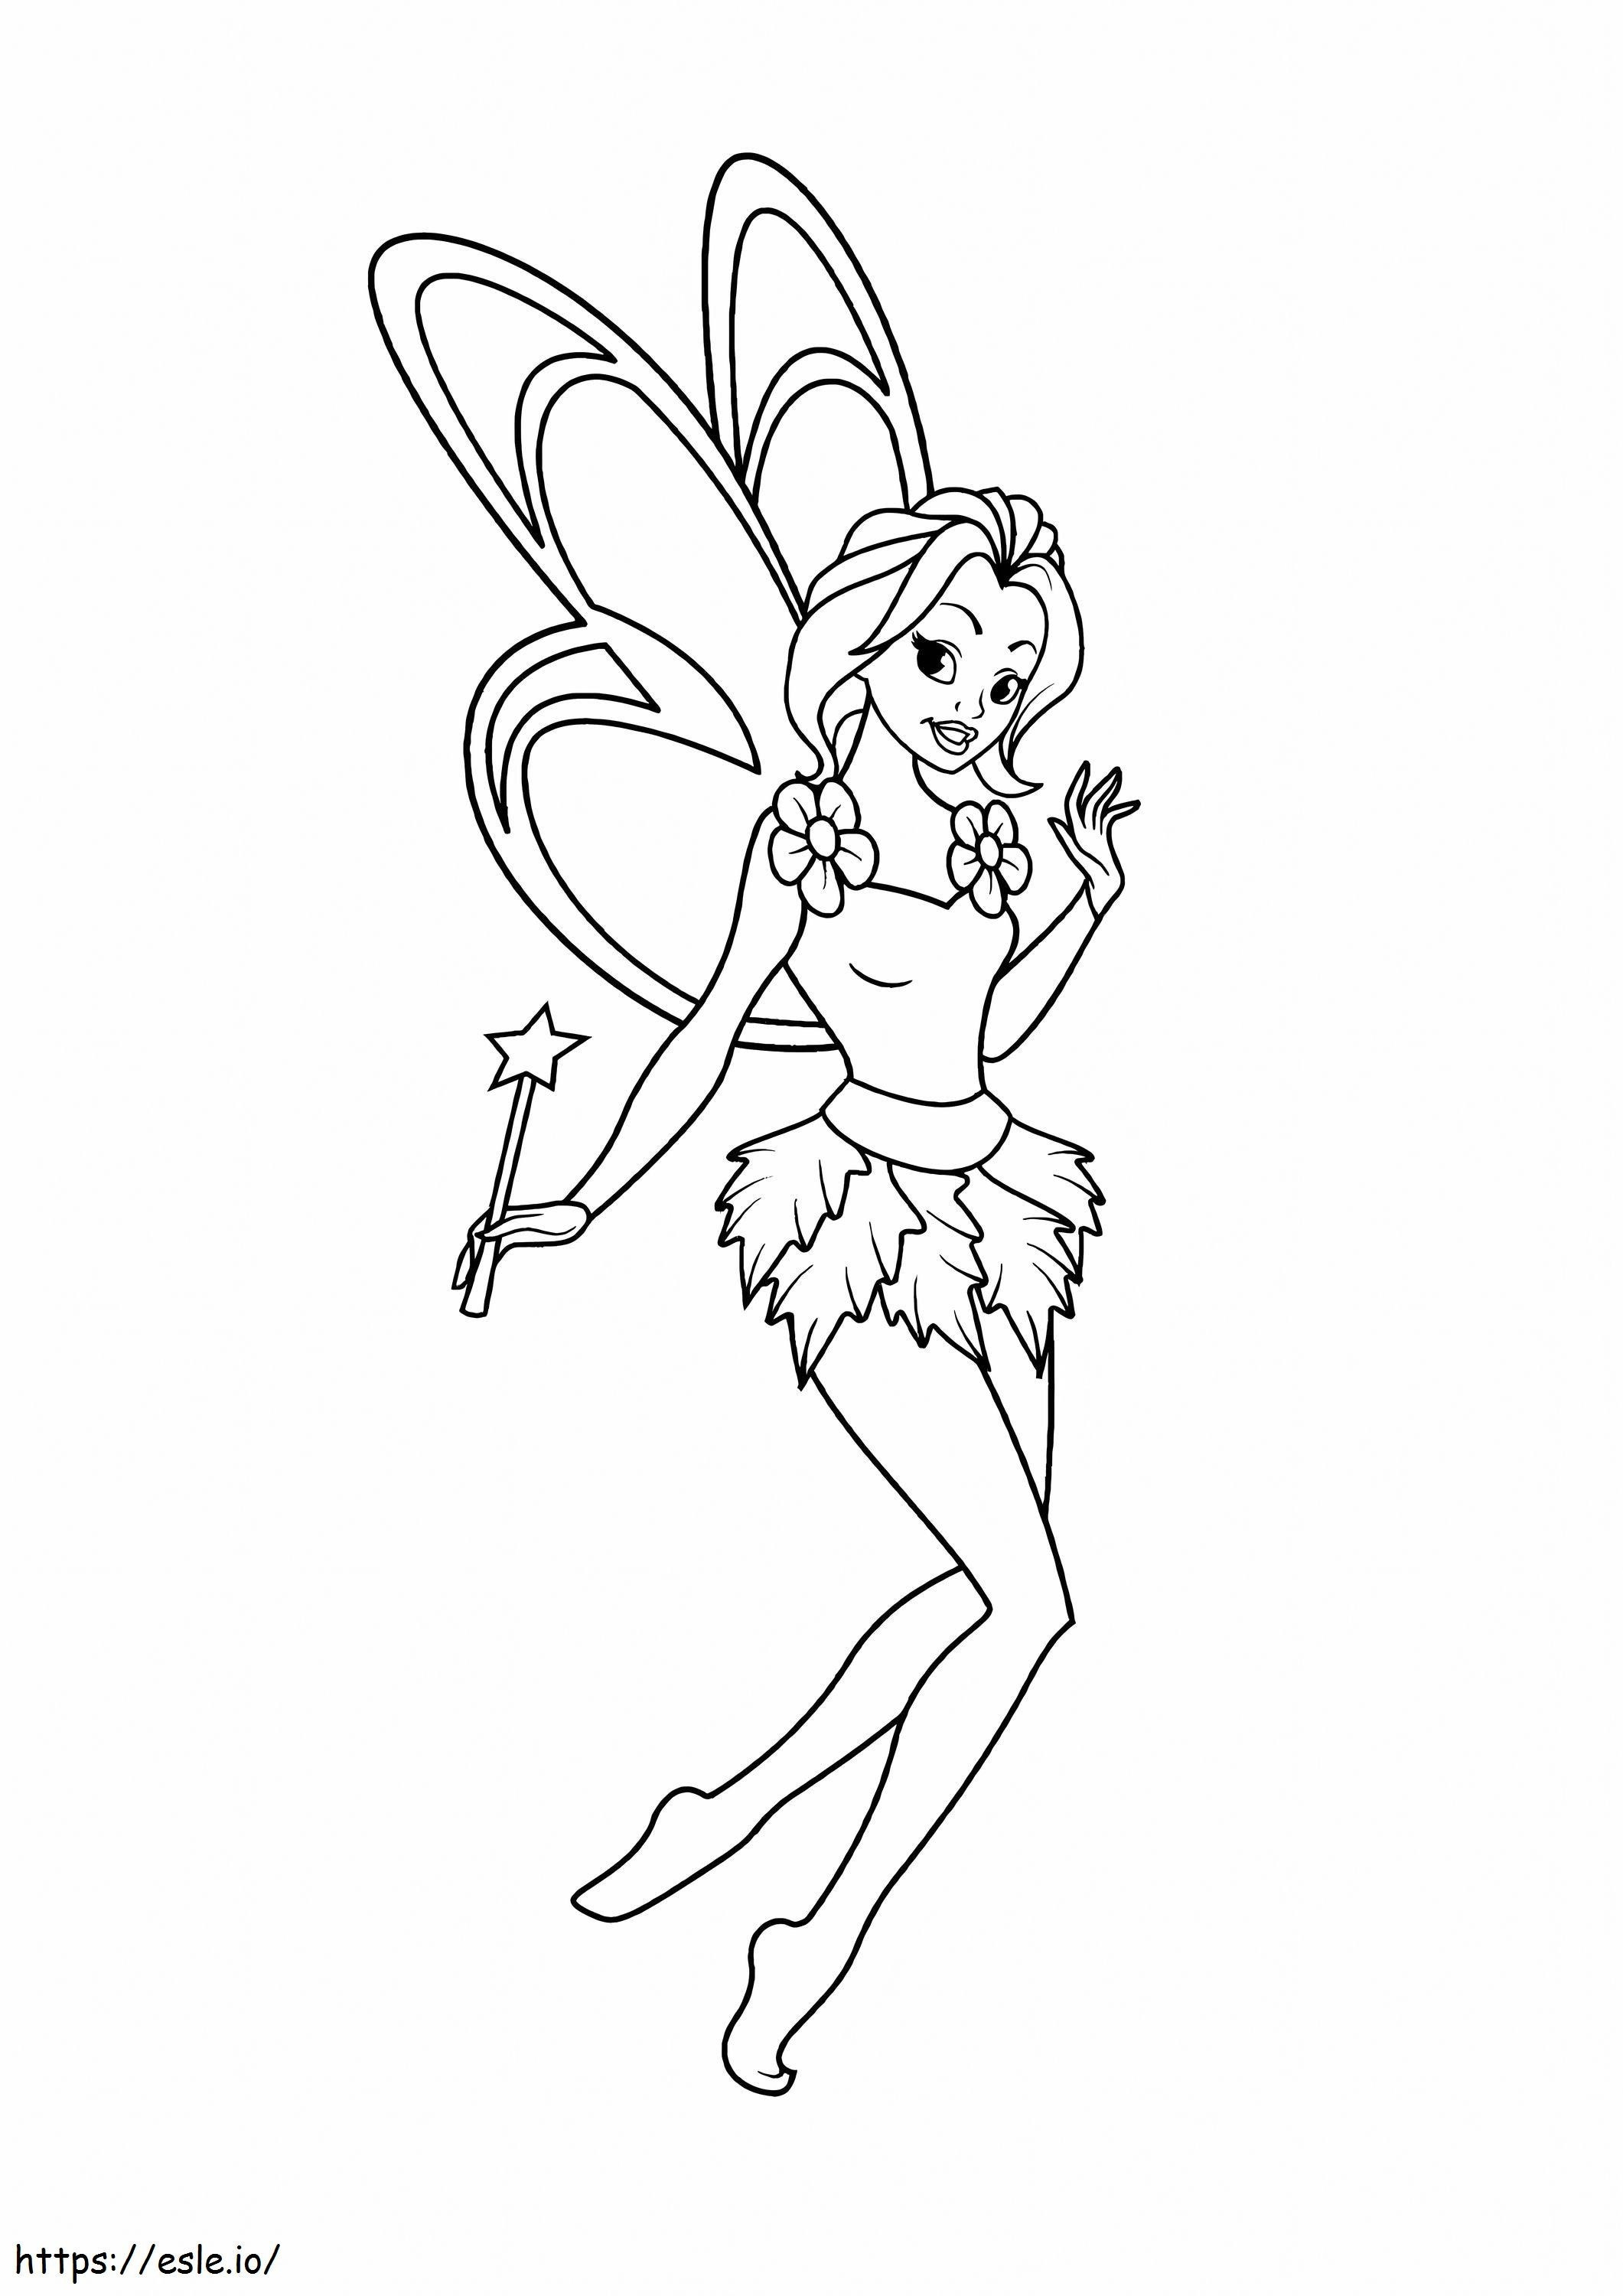 Simple Fairy With Magic Wand coloring page